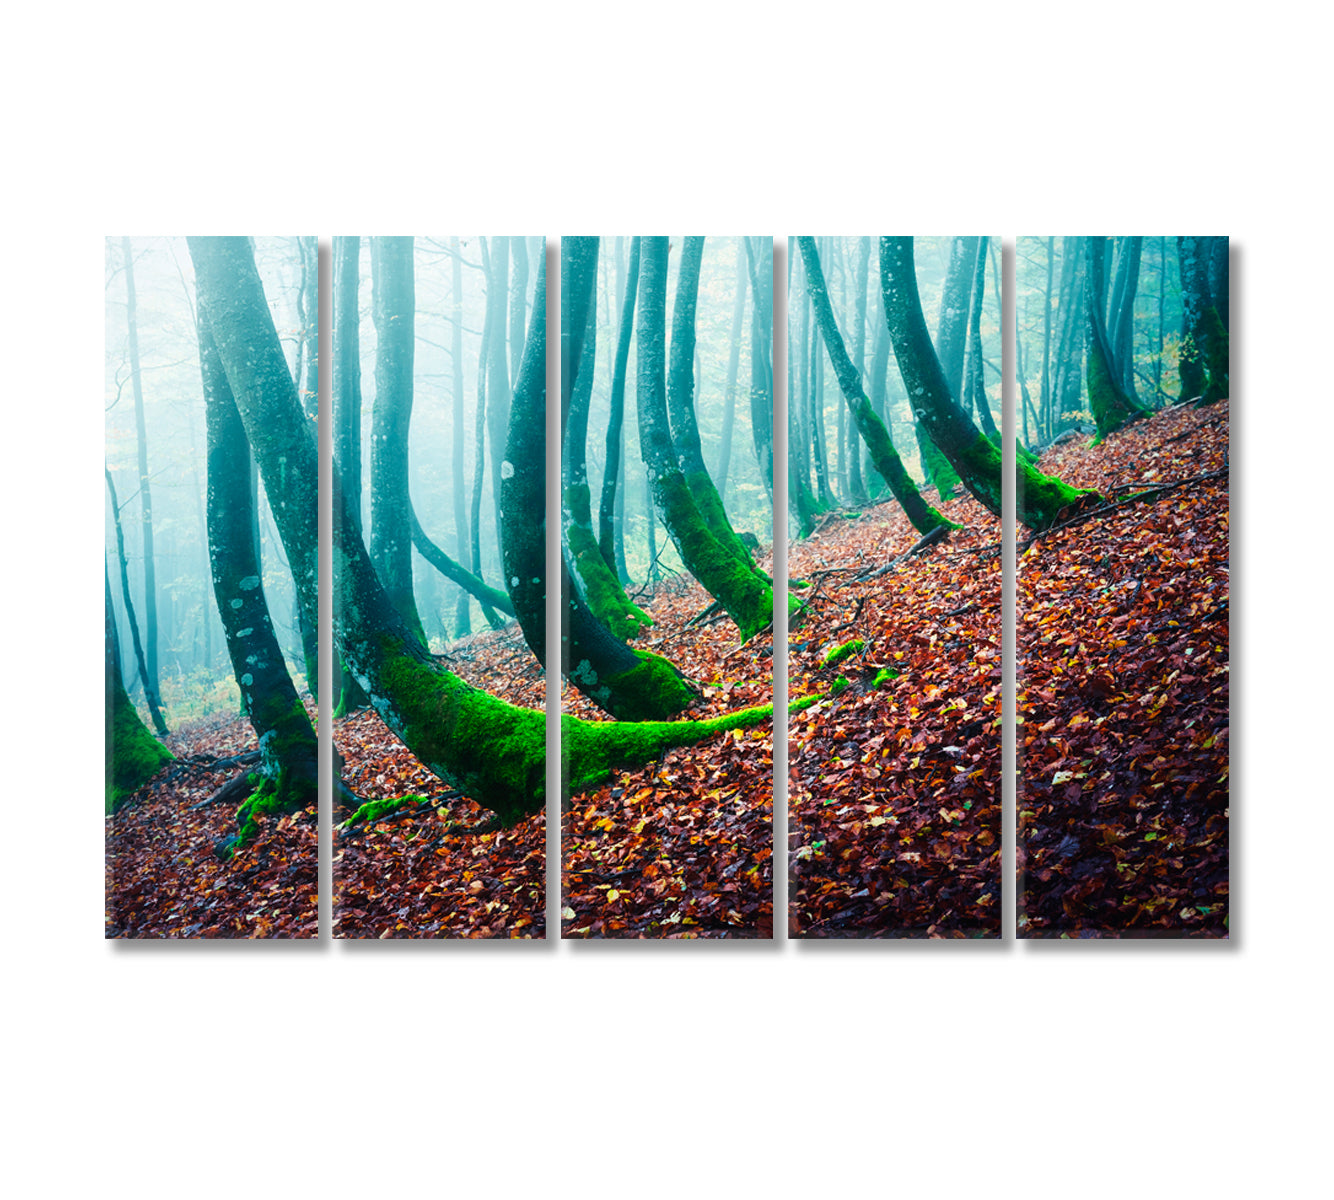 Mysterious Forest with Beech with Moss Canvas Print-Canvas Print-CetArt-5 Panels-36x24 inches-CetArt